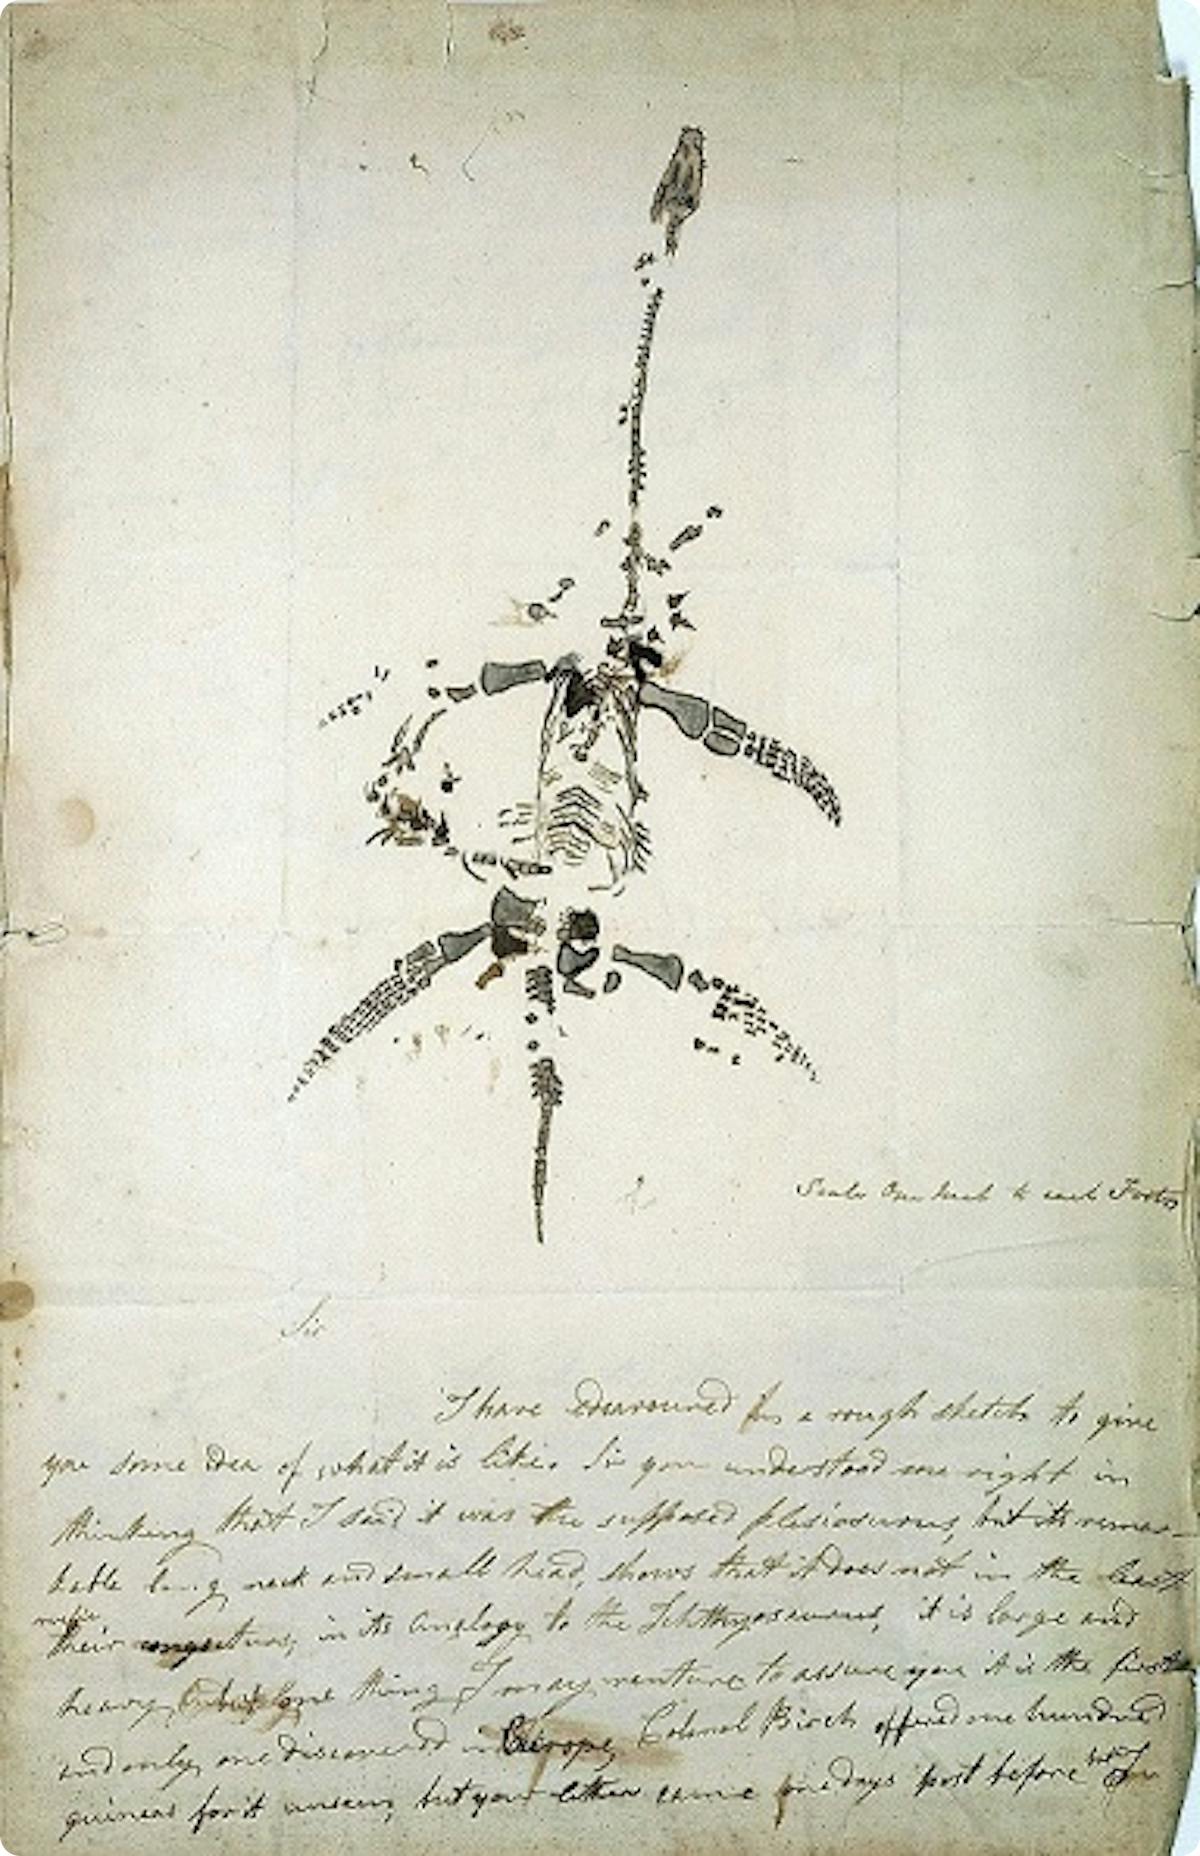 Autograph letter concerning the discovery of plesiosaurus, from Mary Anning, 1823.